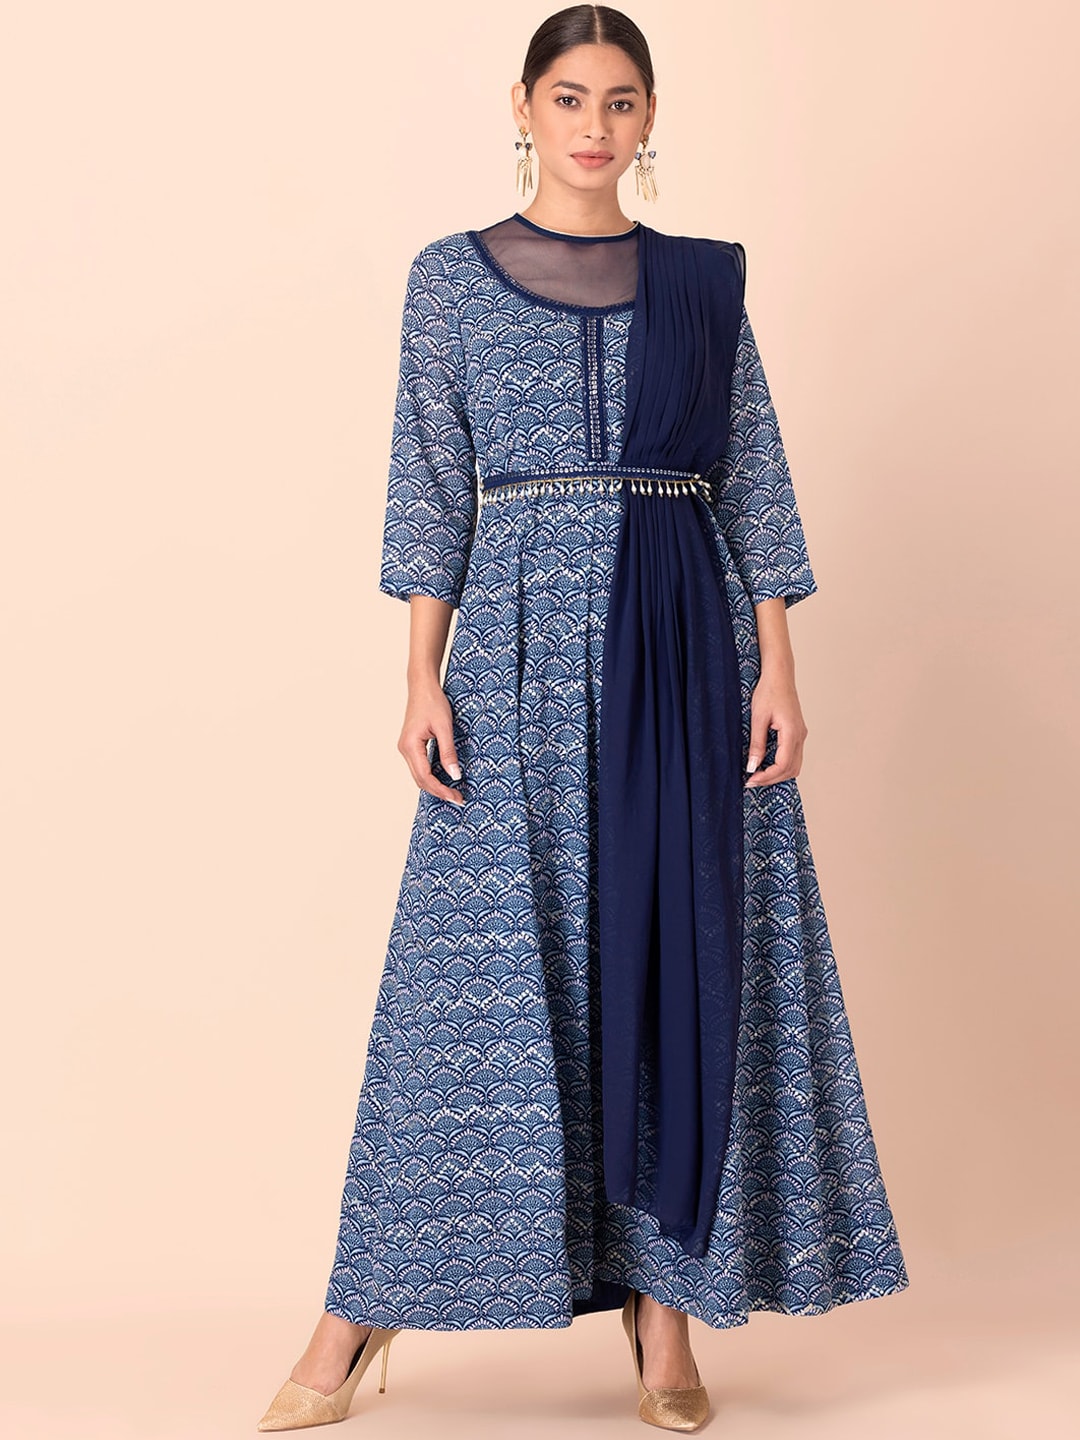 INDYA Women Navy Blue & White Printed Georgette Maxi Kurta with Attached Dupatta Price in India